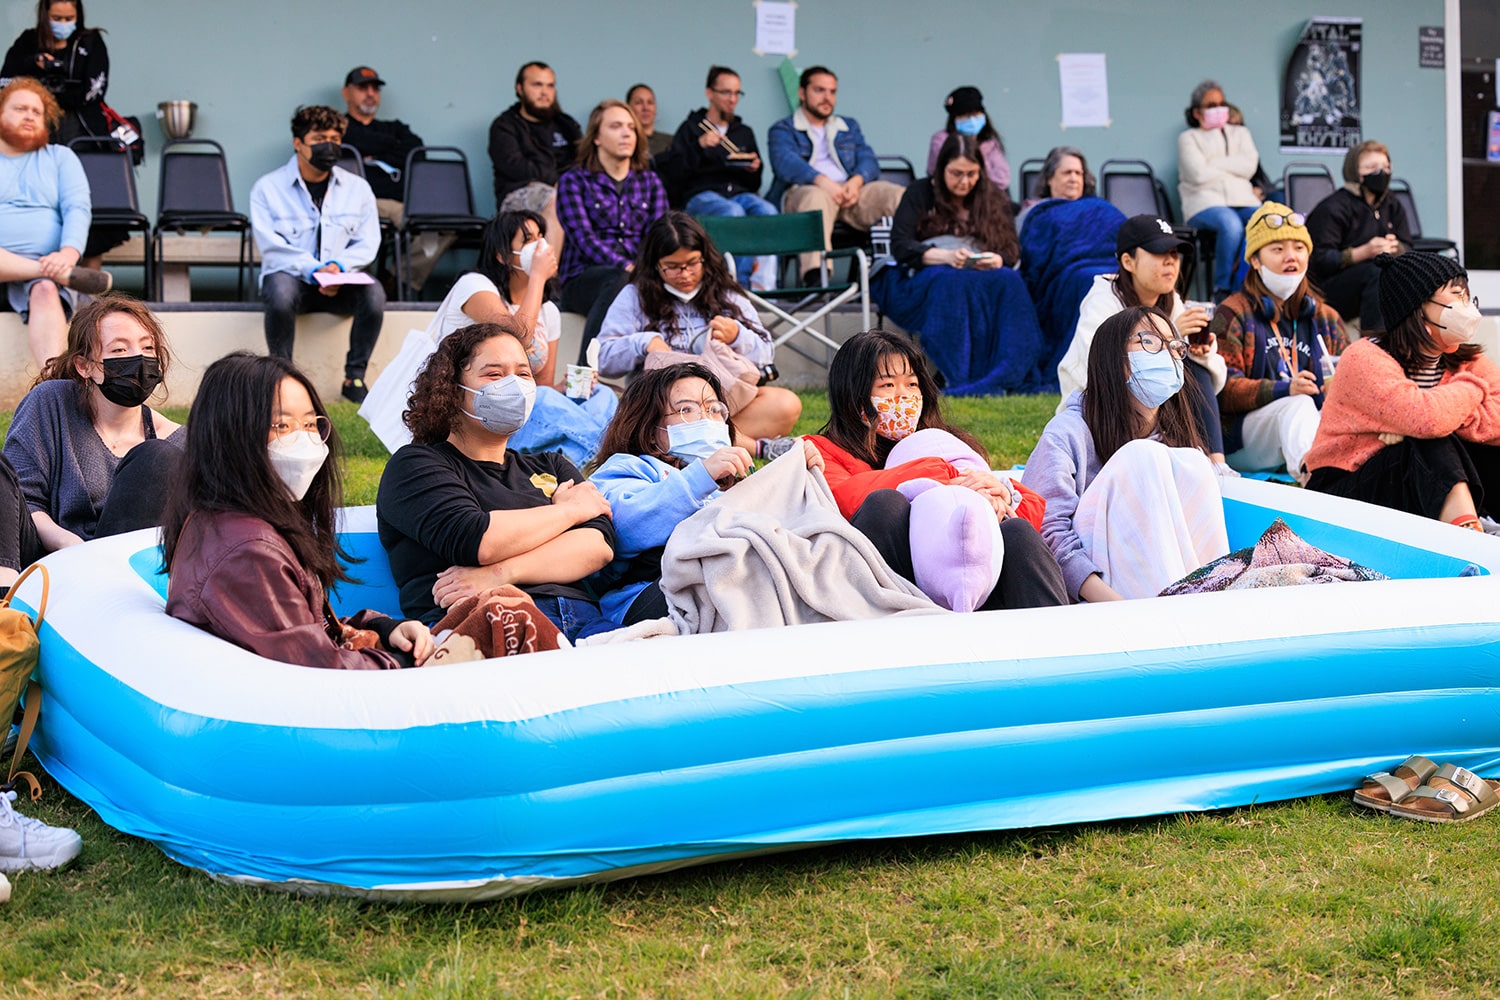 Group of students sitting in an inflatable pool on the lawn.